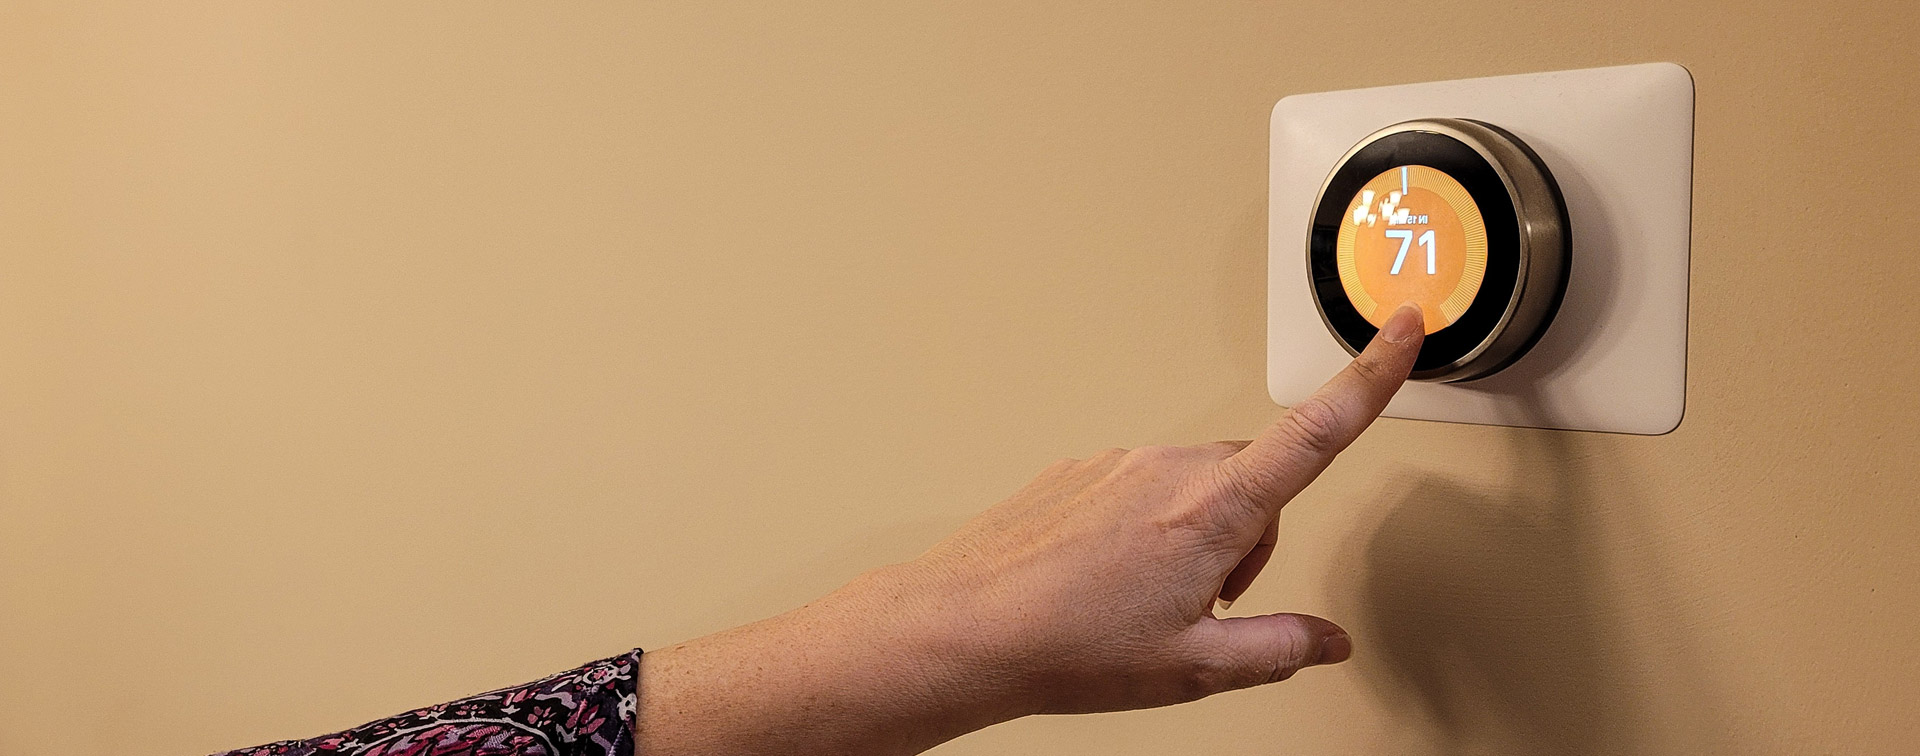 Setting a thermostat